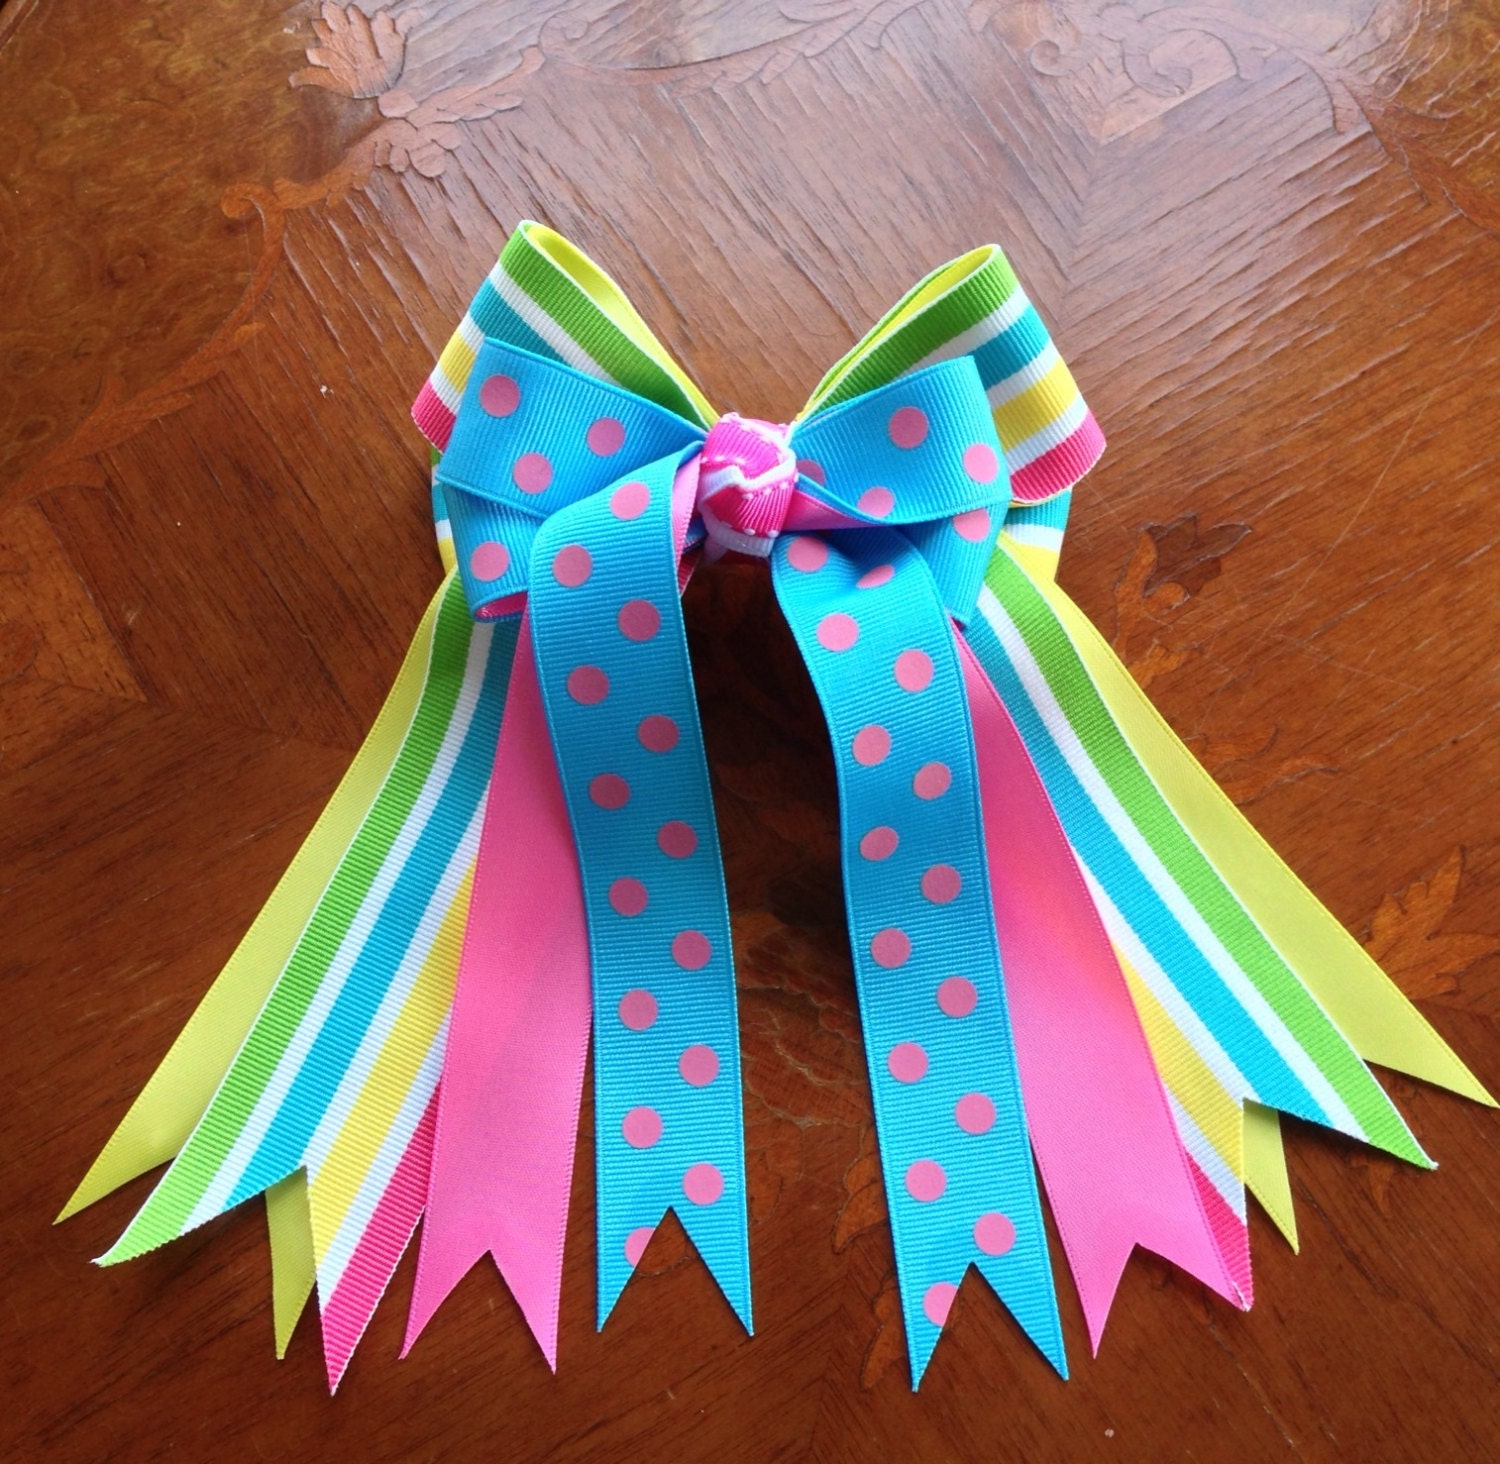 Hair Bows for Horse Shows/Equestrian by BowdanglesShowBows on Etsy